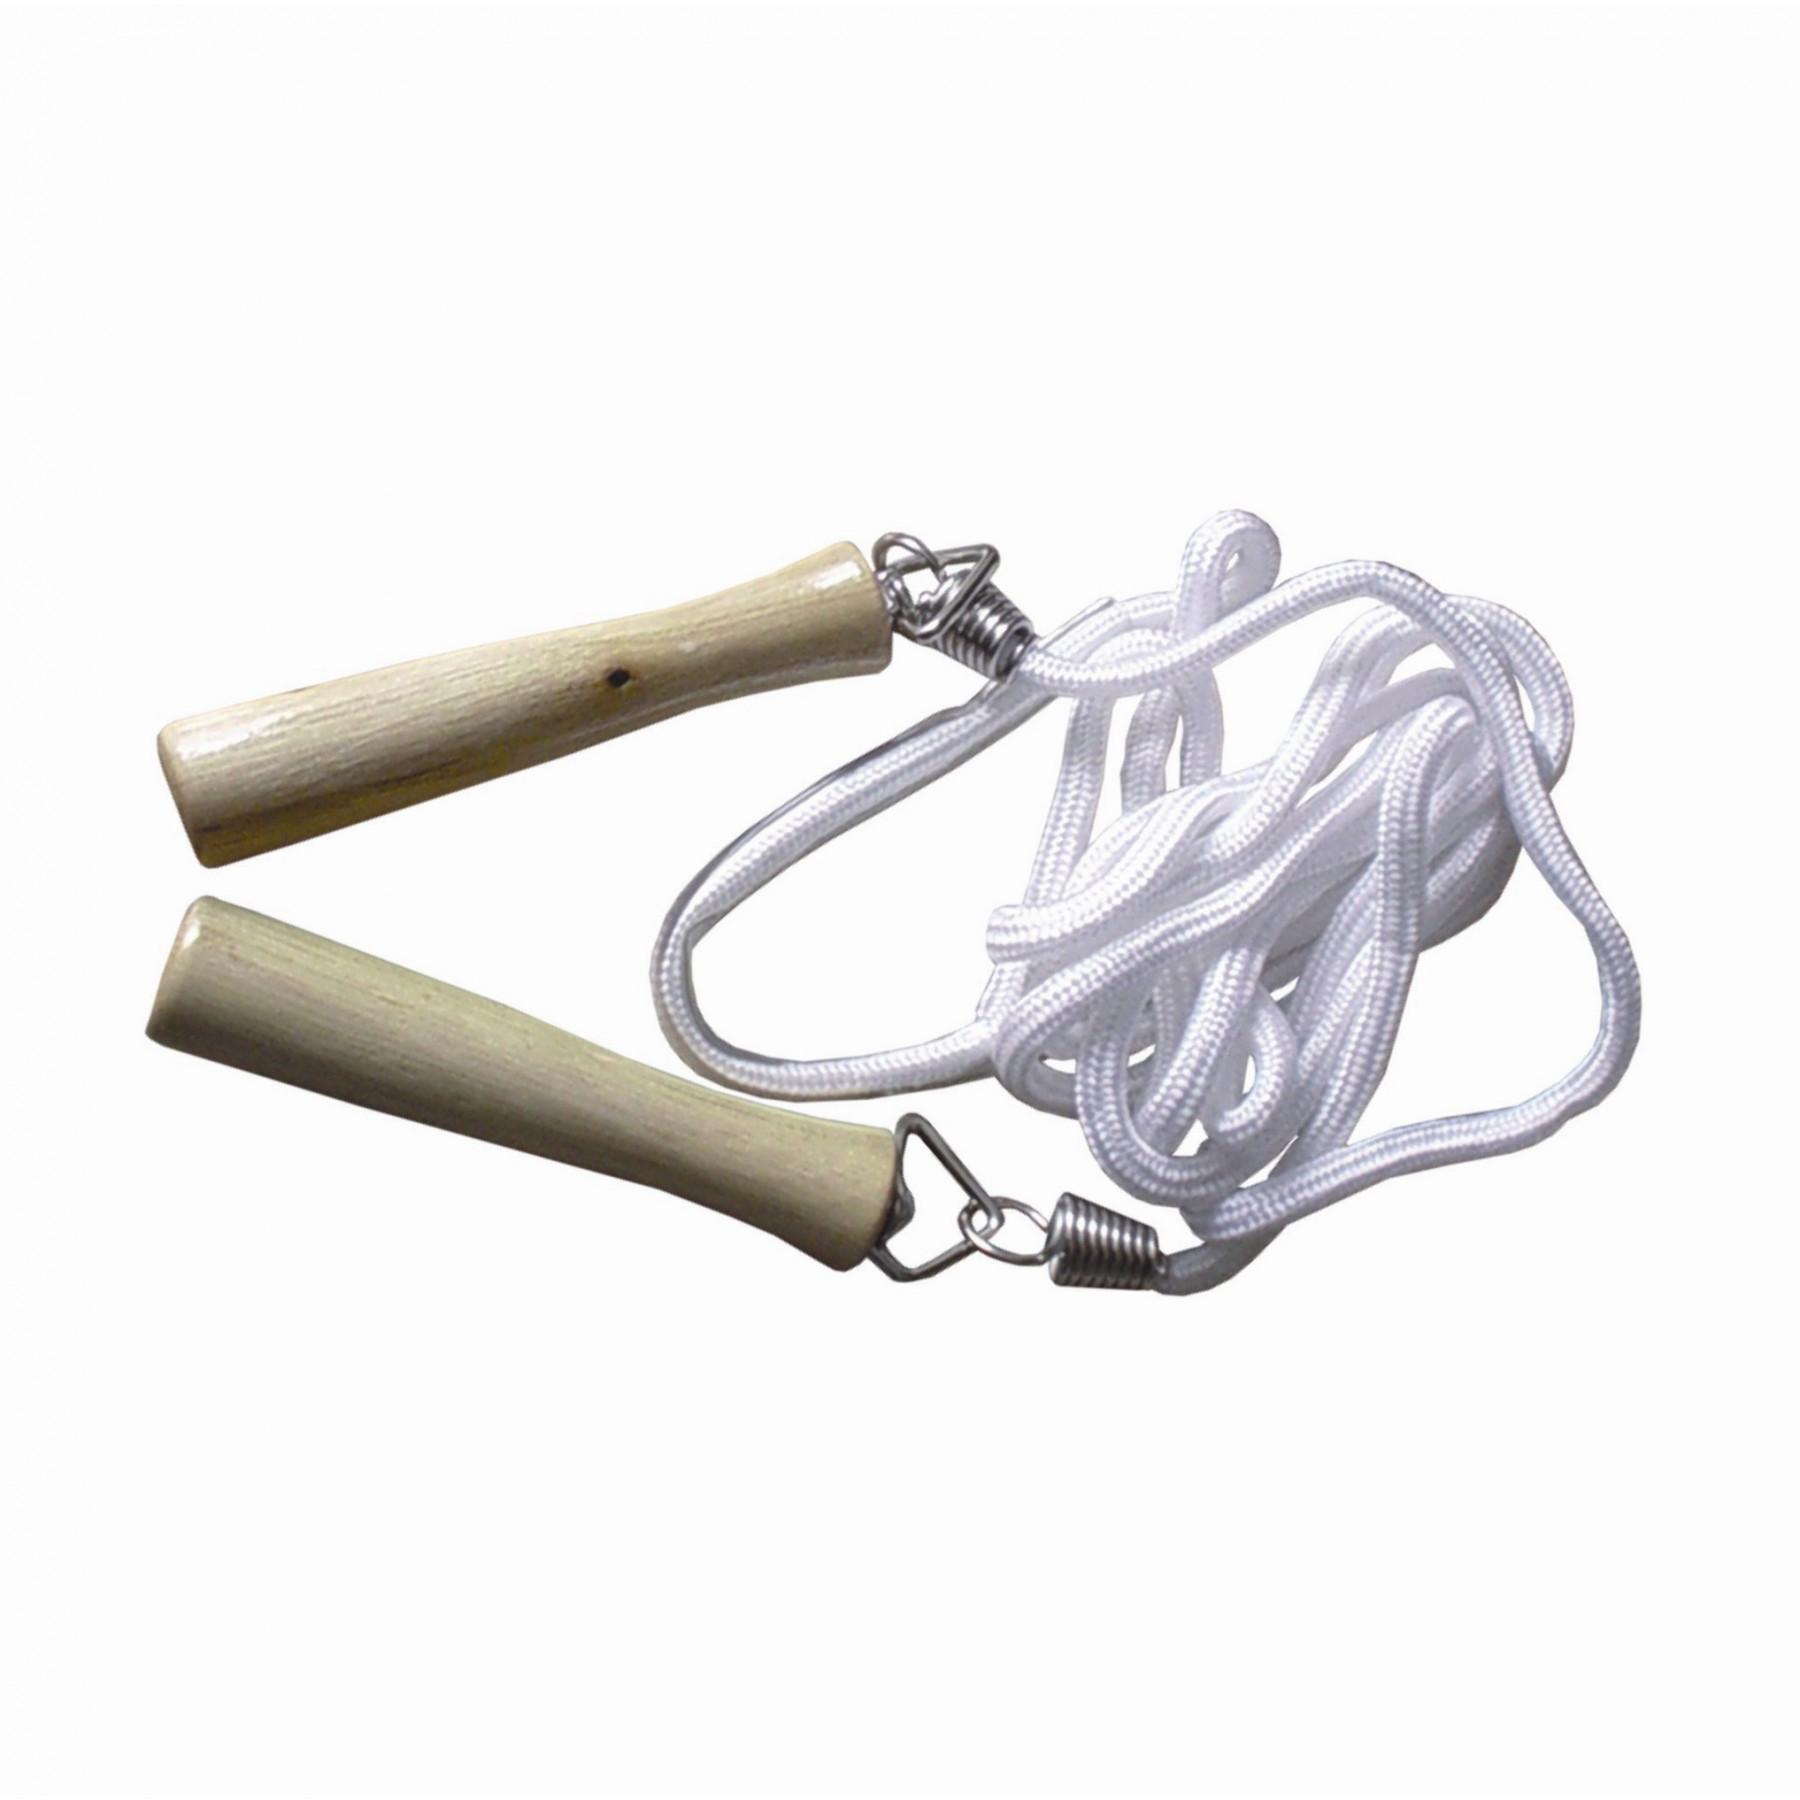 Skipping rope with wooden handles Sporti